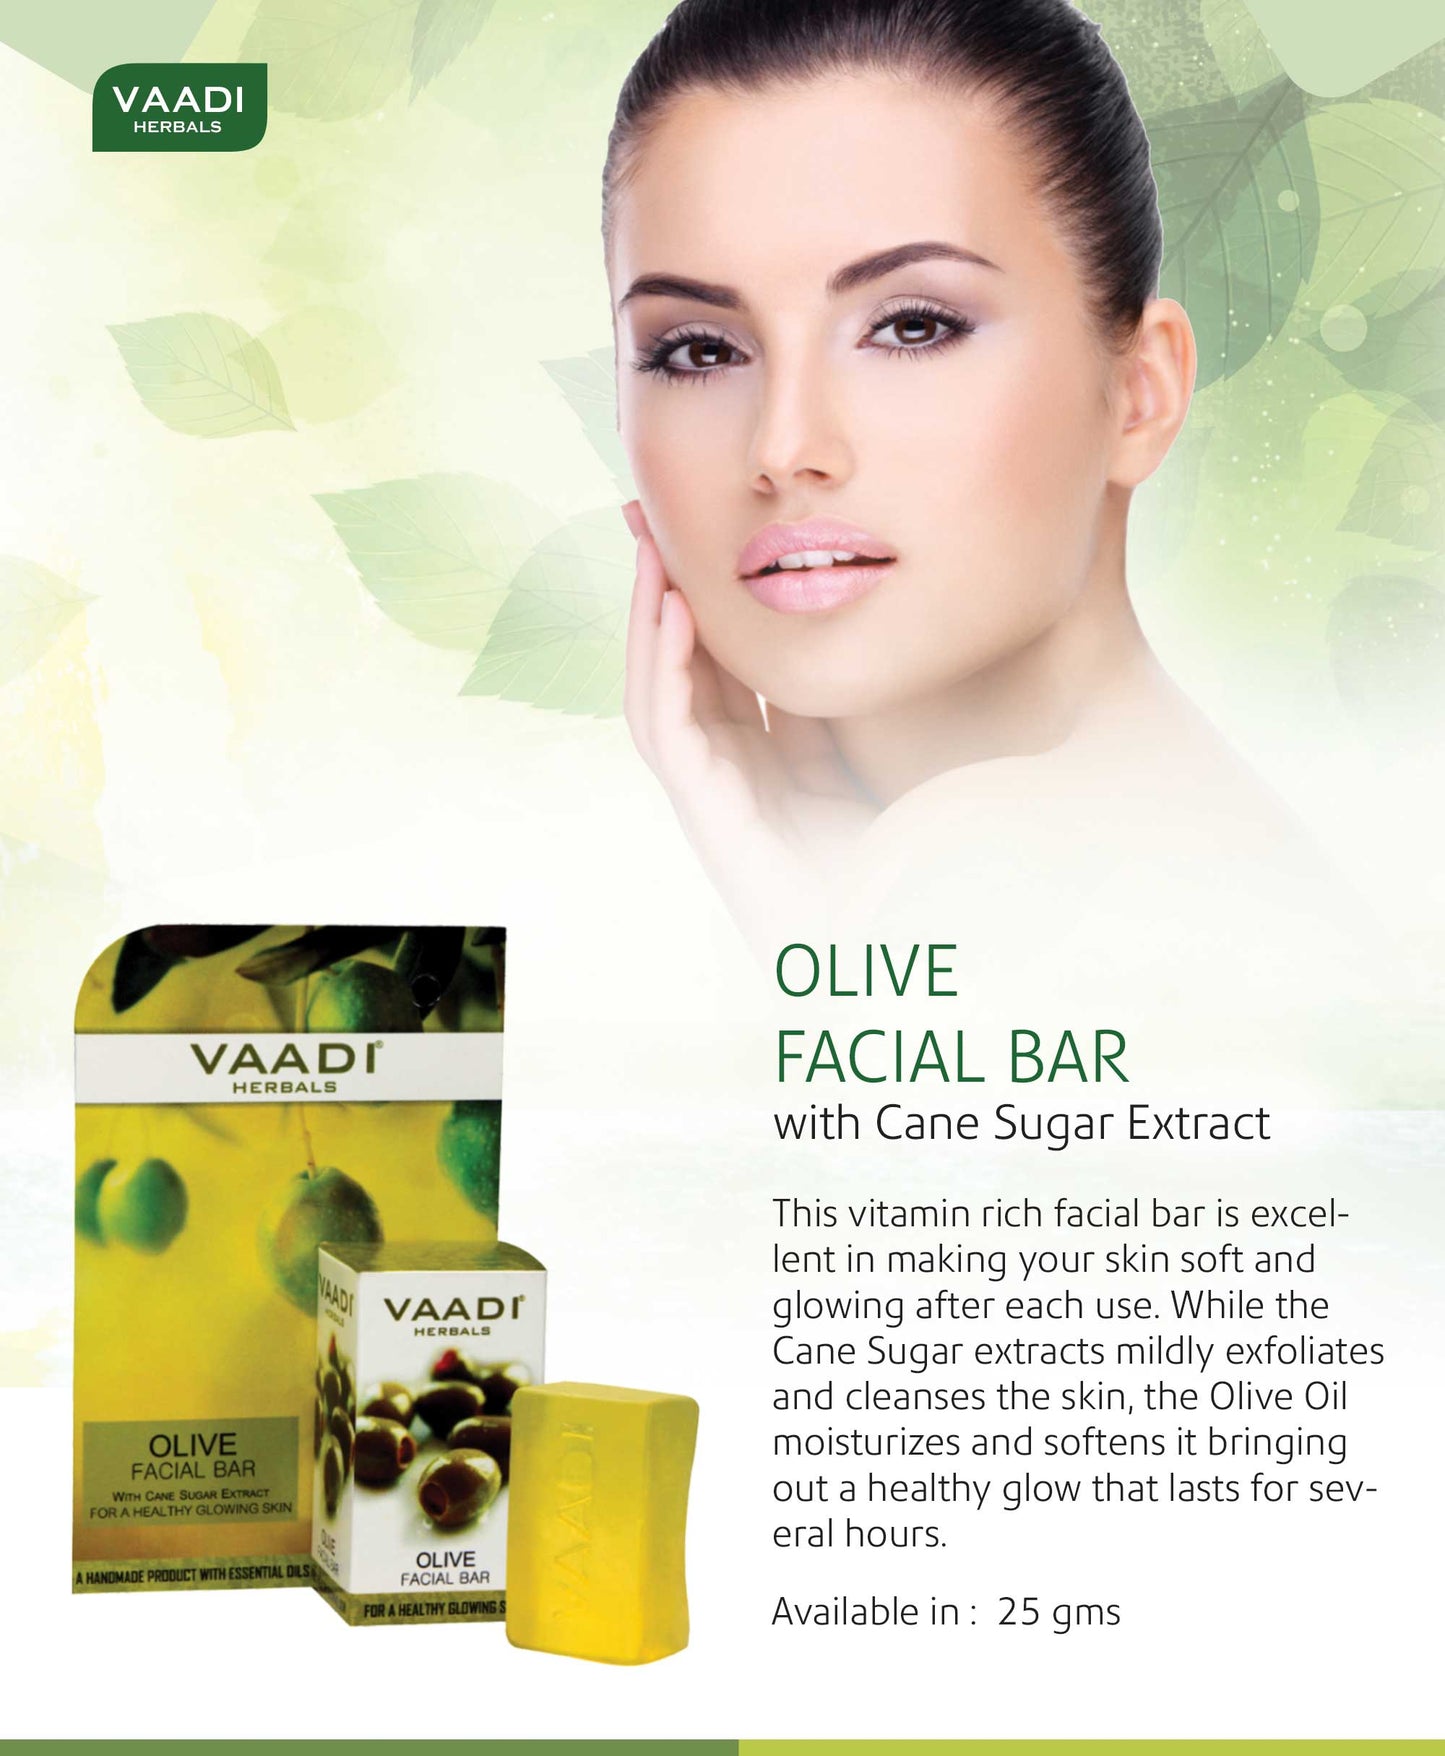 Organic Olive Facial Bar with Cane Sugar Extract - Exfoliates and Cleanses the Skin (6 x 25 gms/0.9 oz)